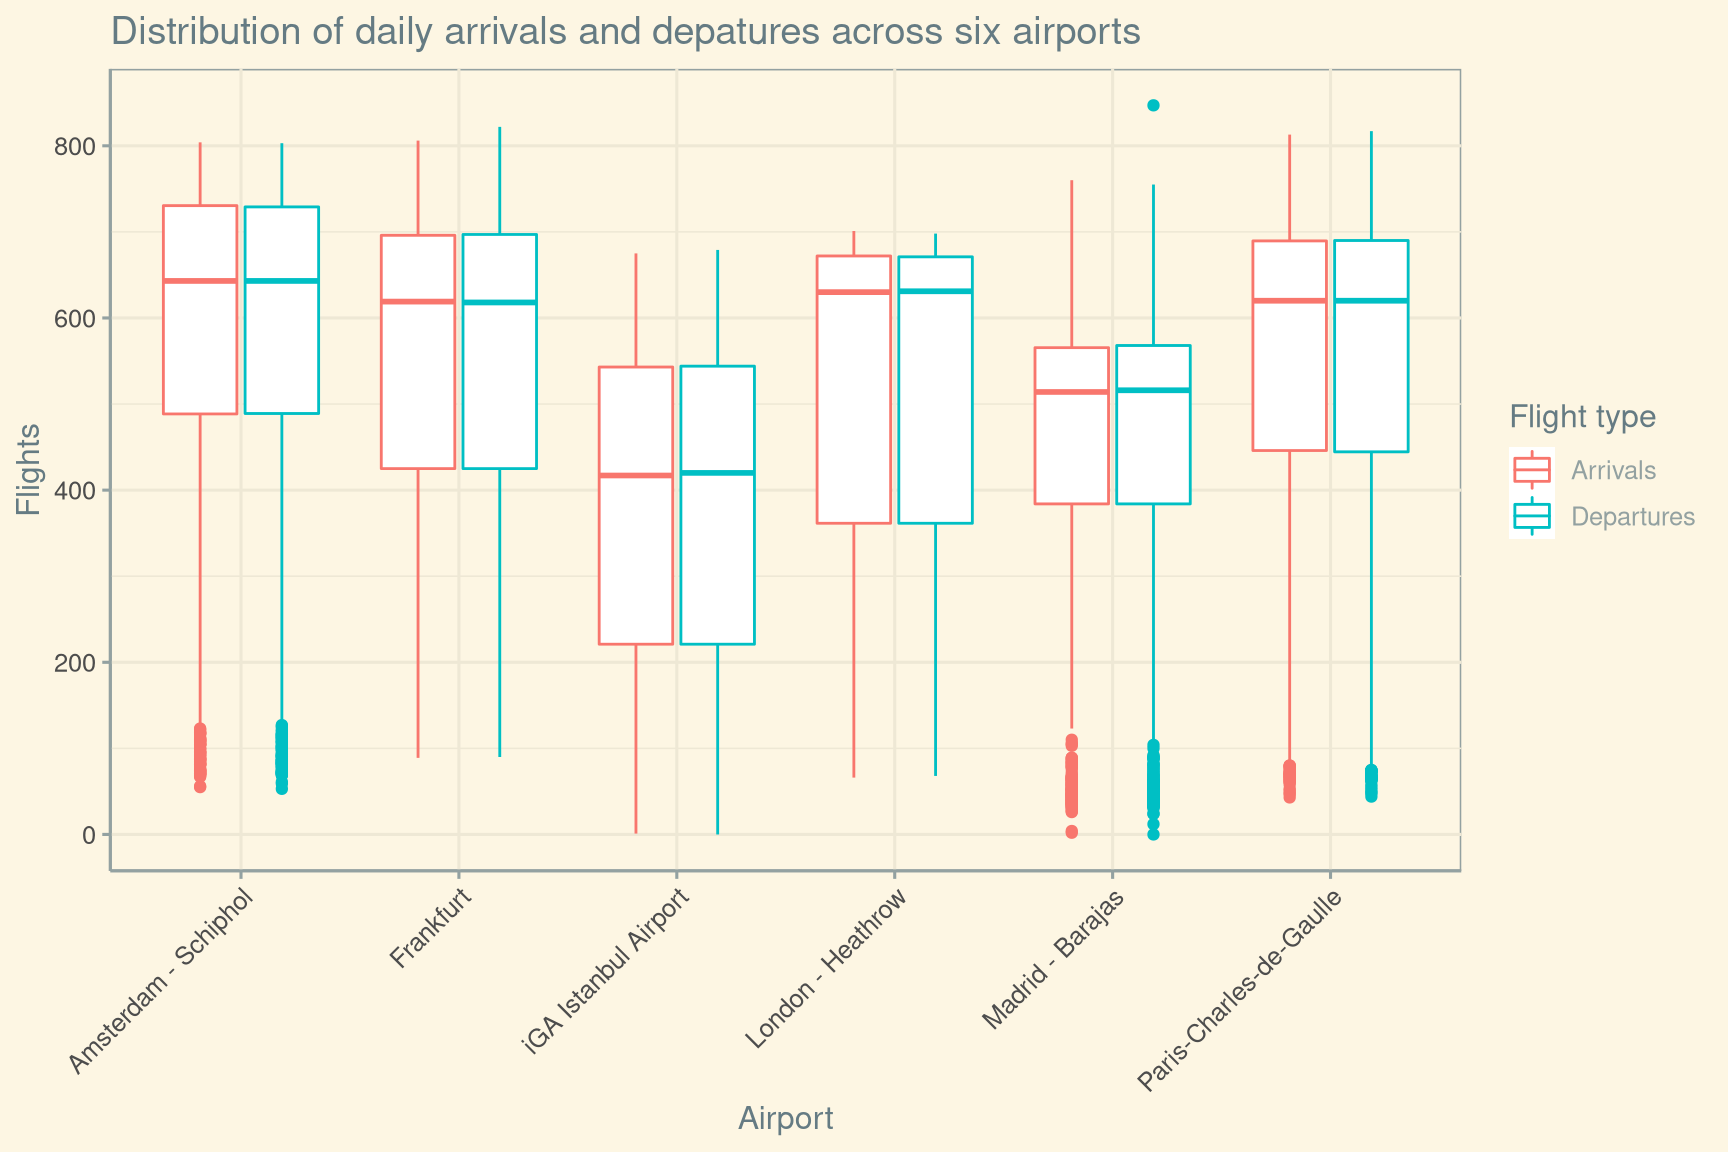 Box plots of daily arrival and depature distribution across top six airports.